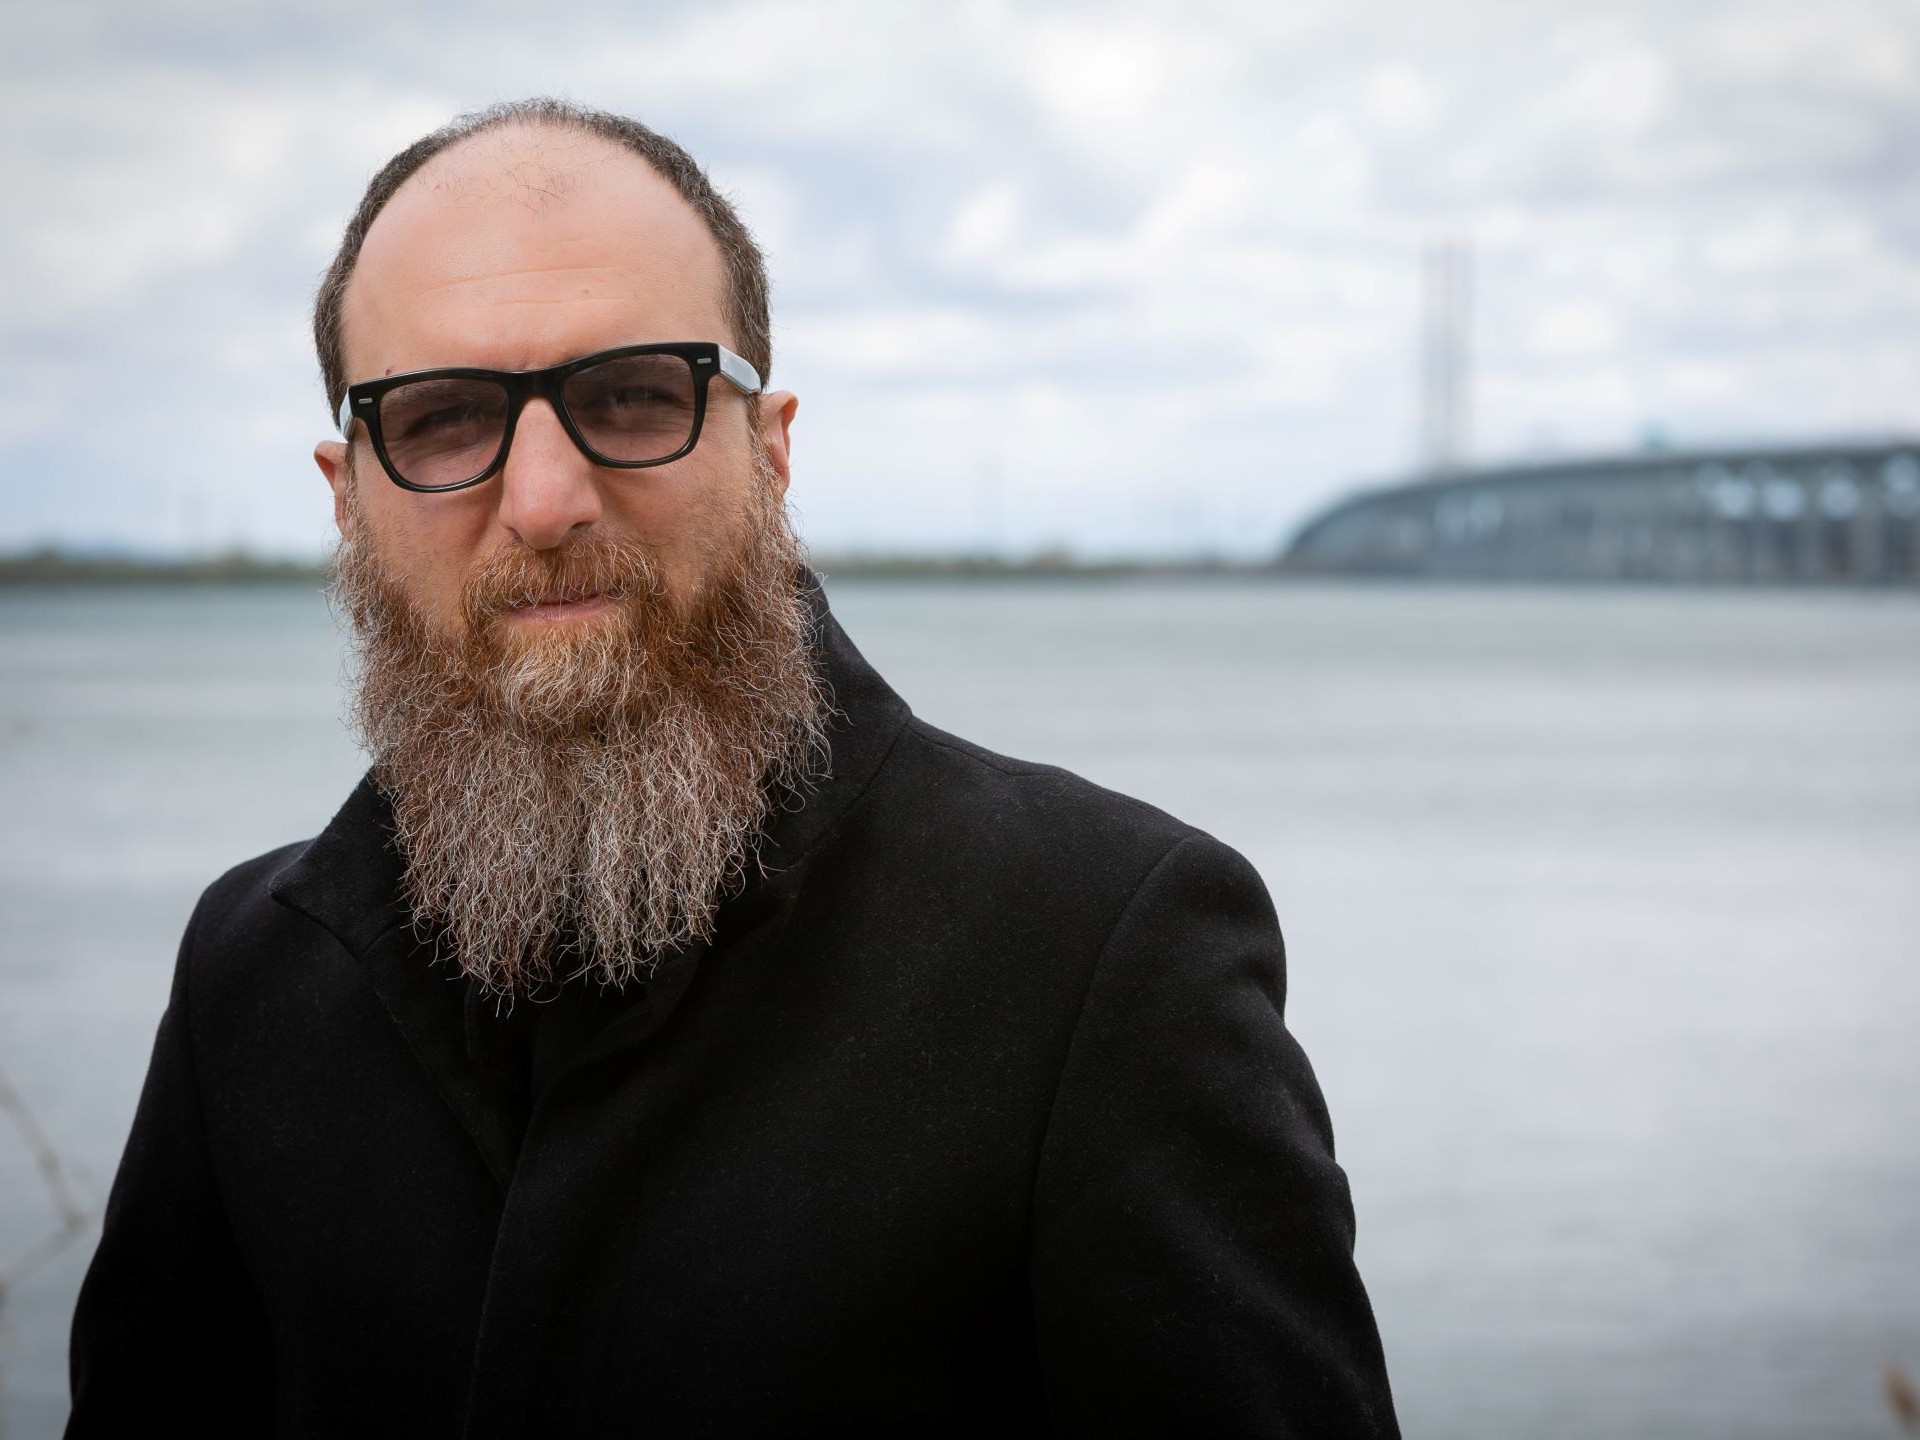 Bearded man in dark glasses standing by the St. Lawrence River